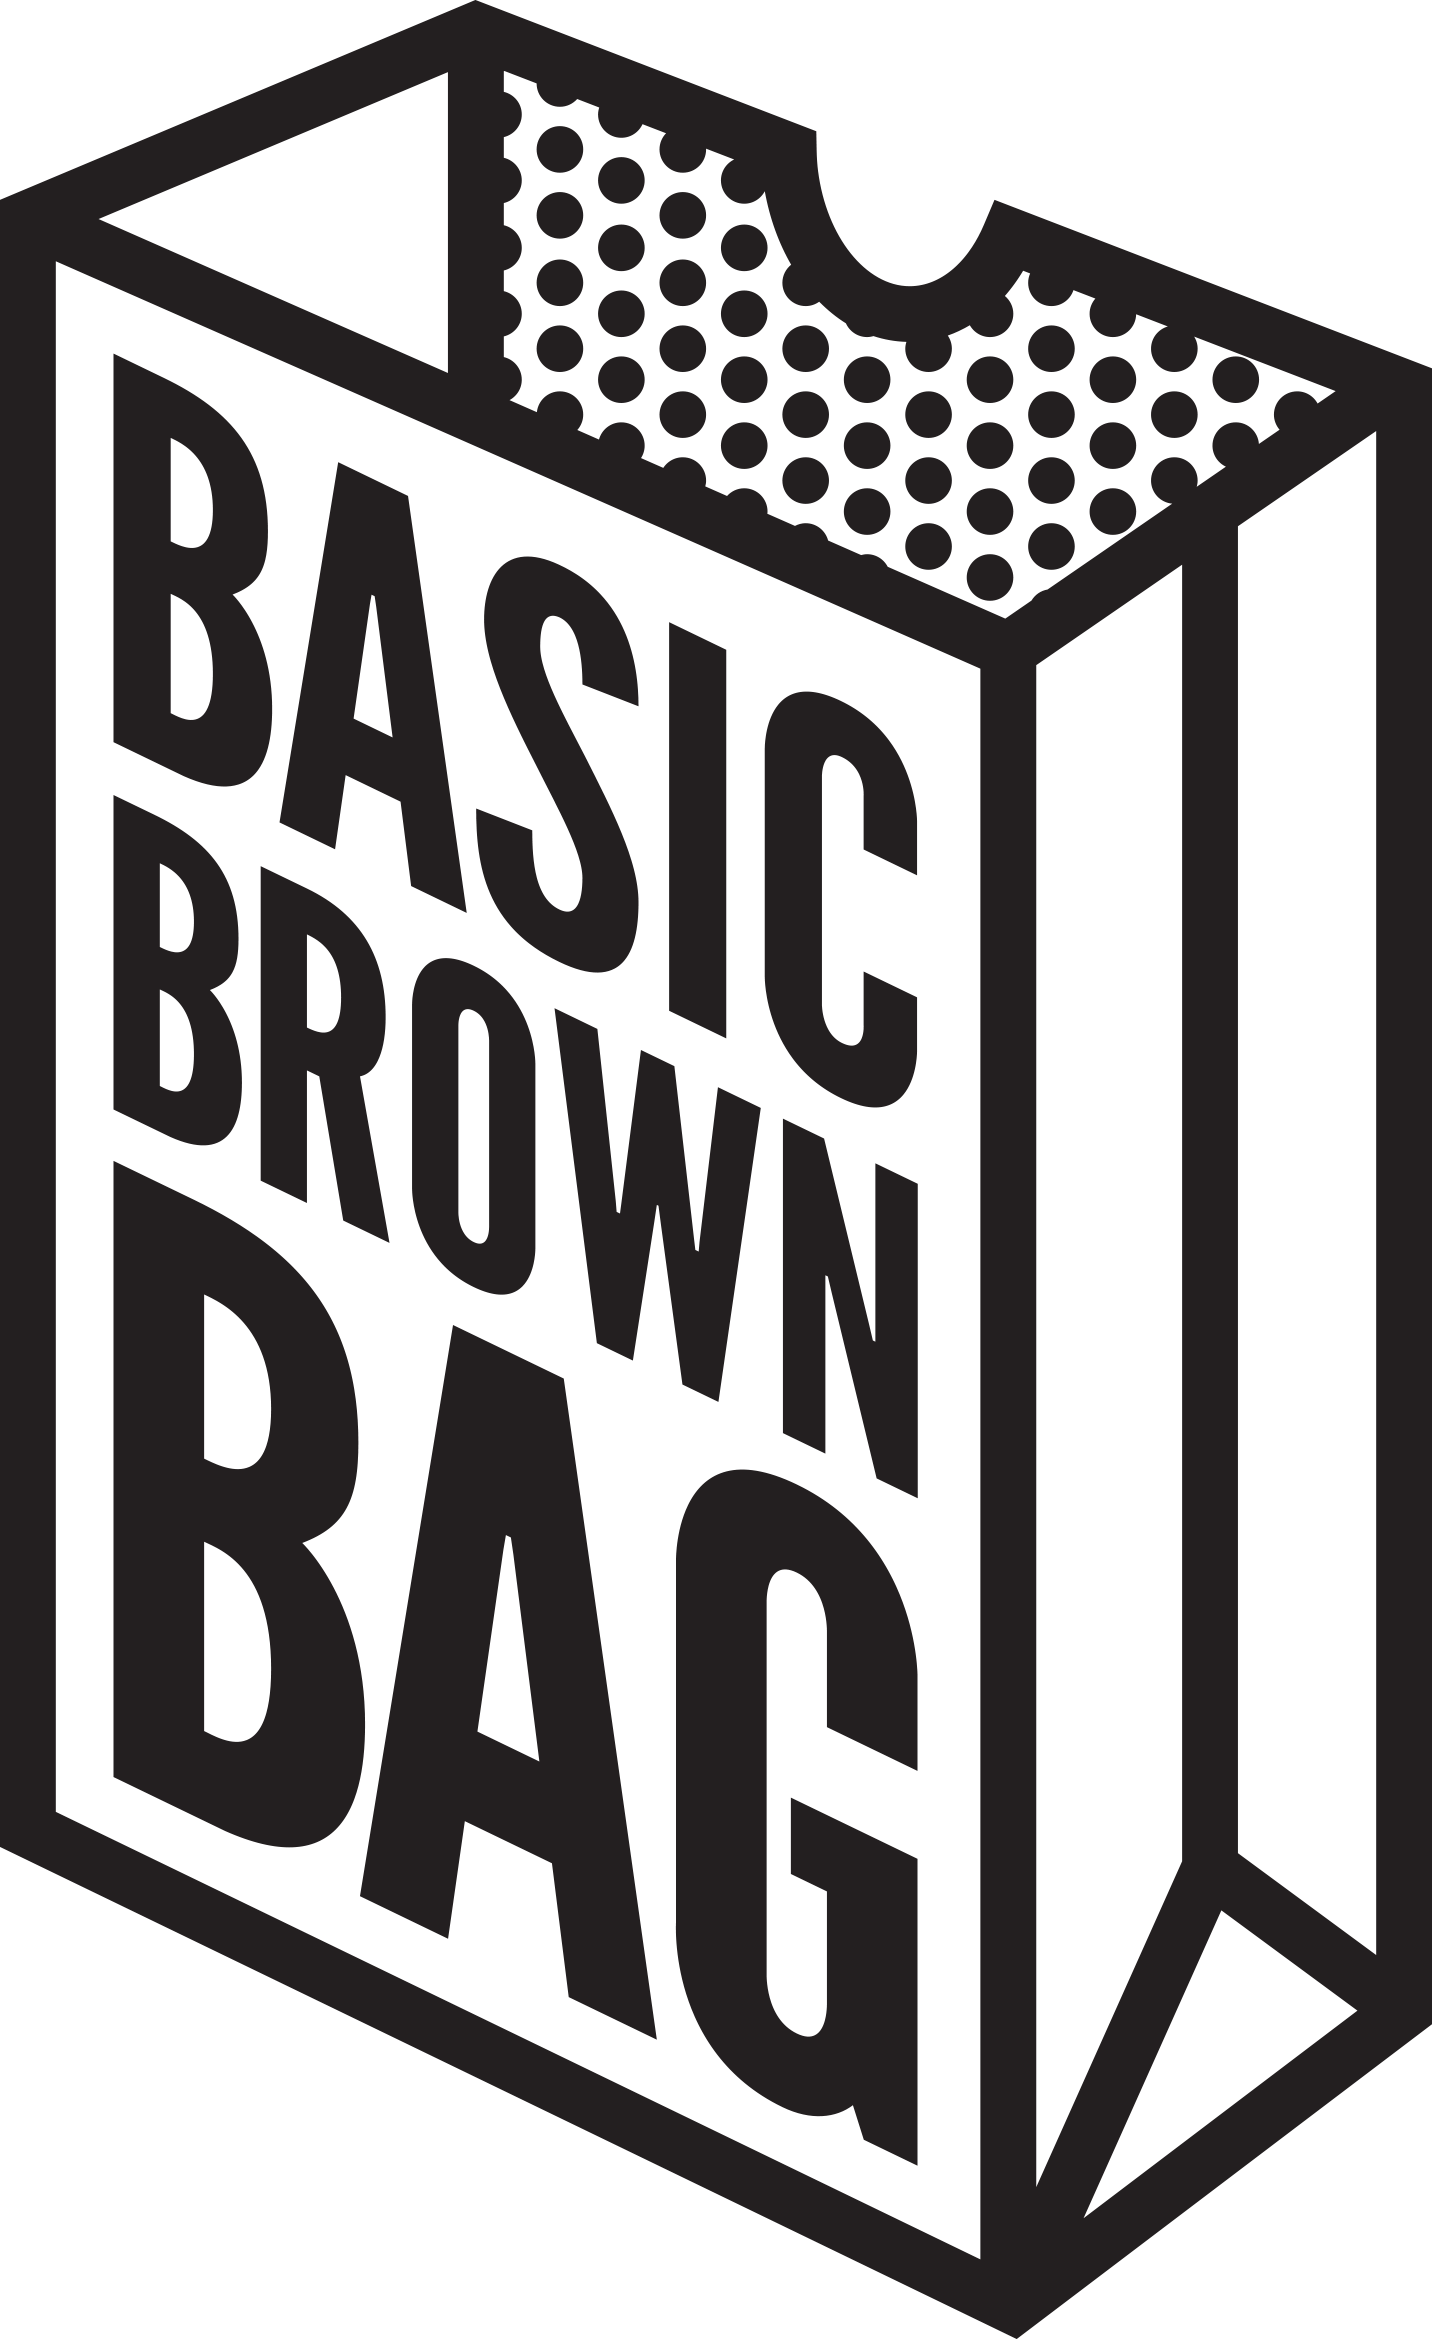 Classic Events Catering - Basic Brown Bag Logo